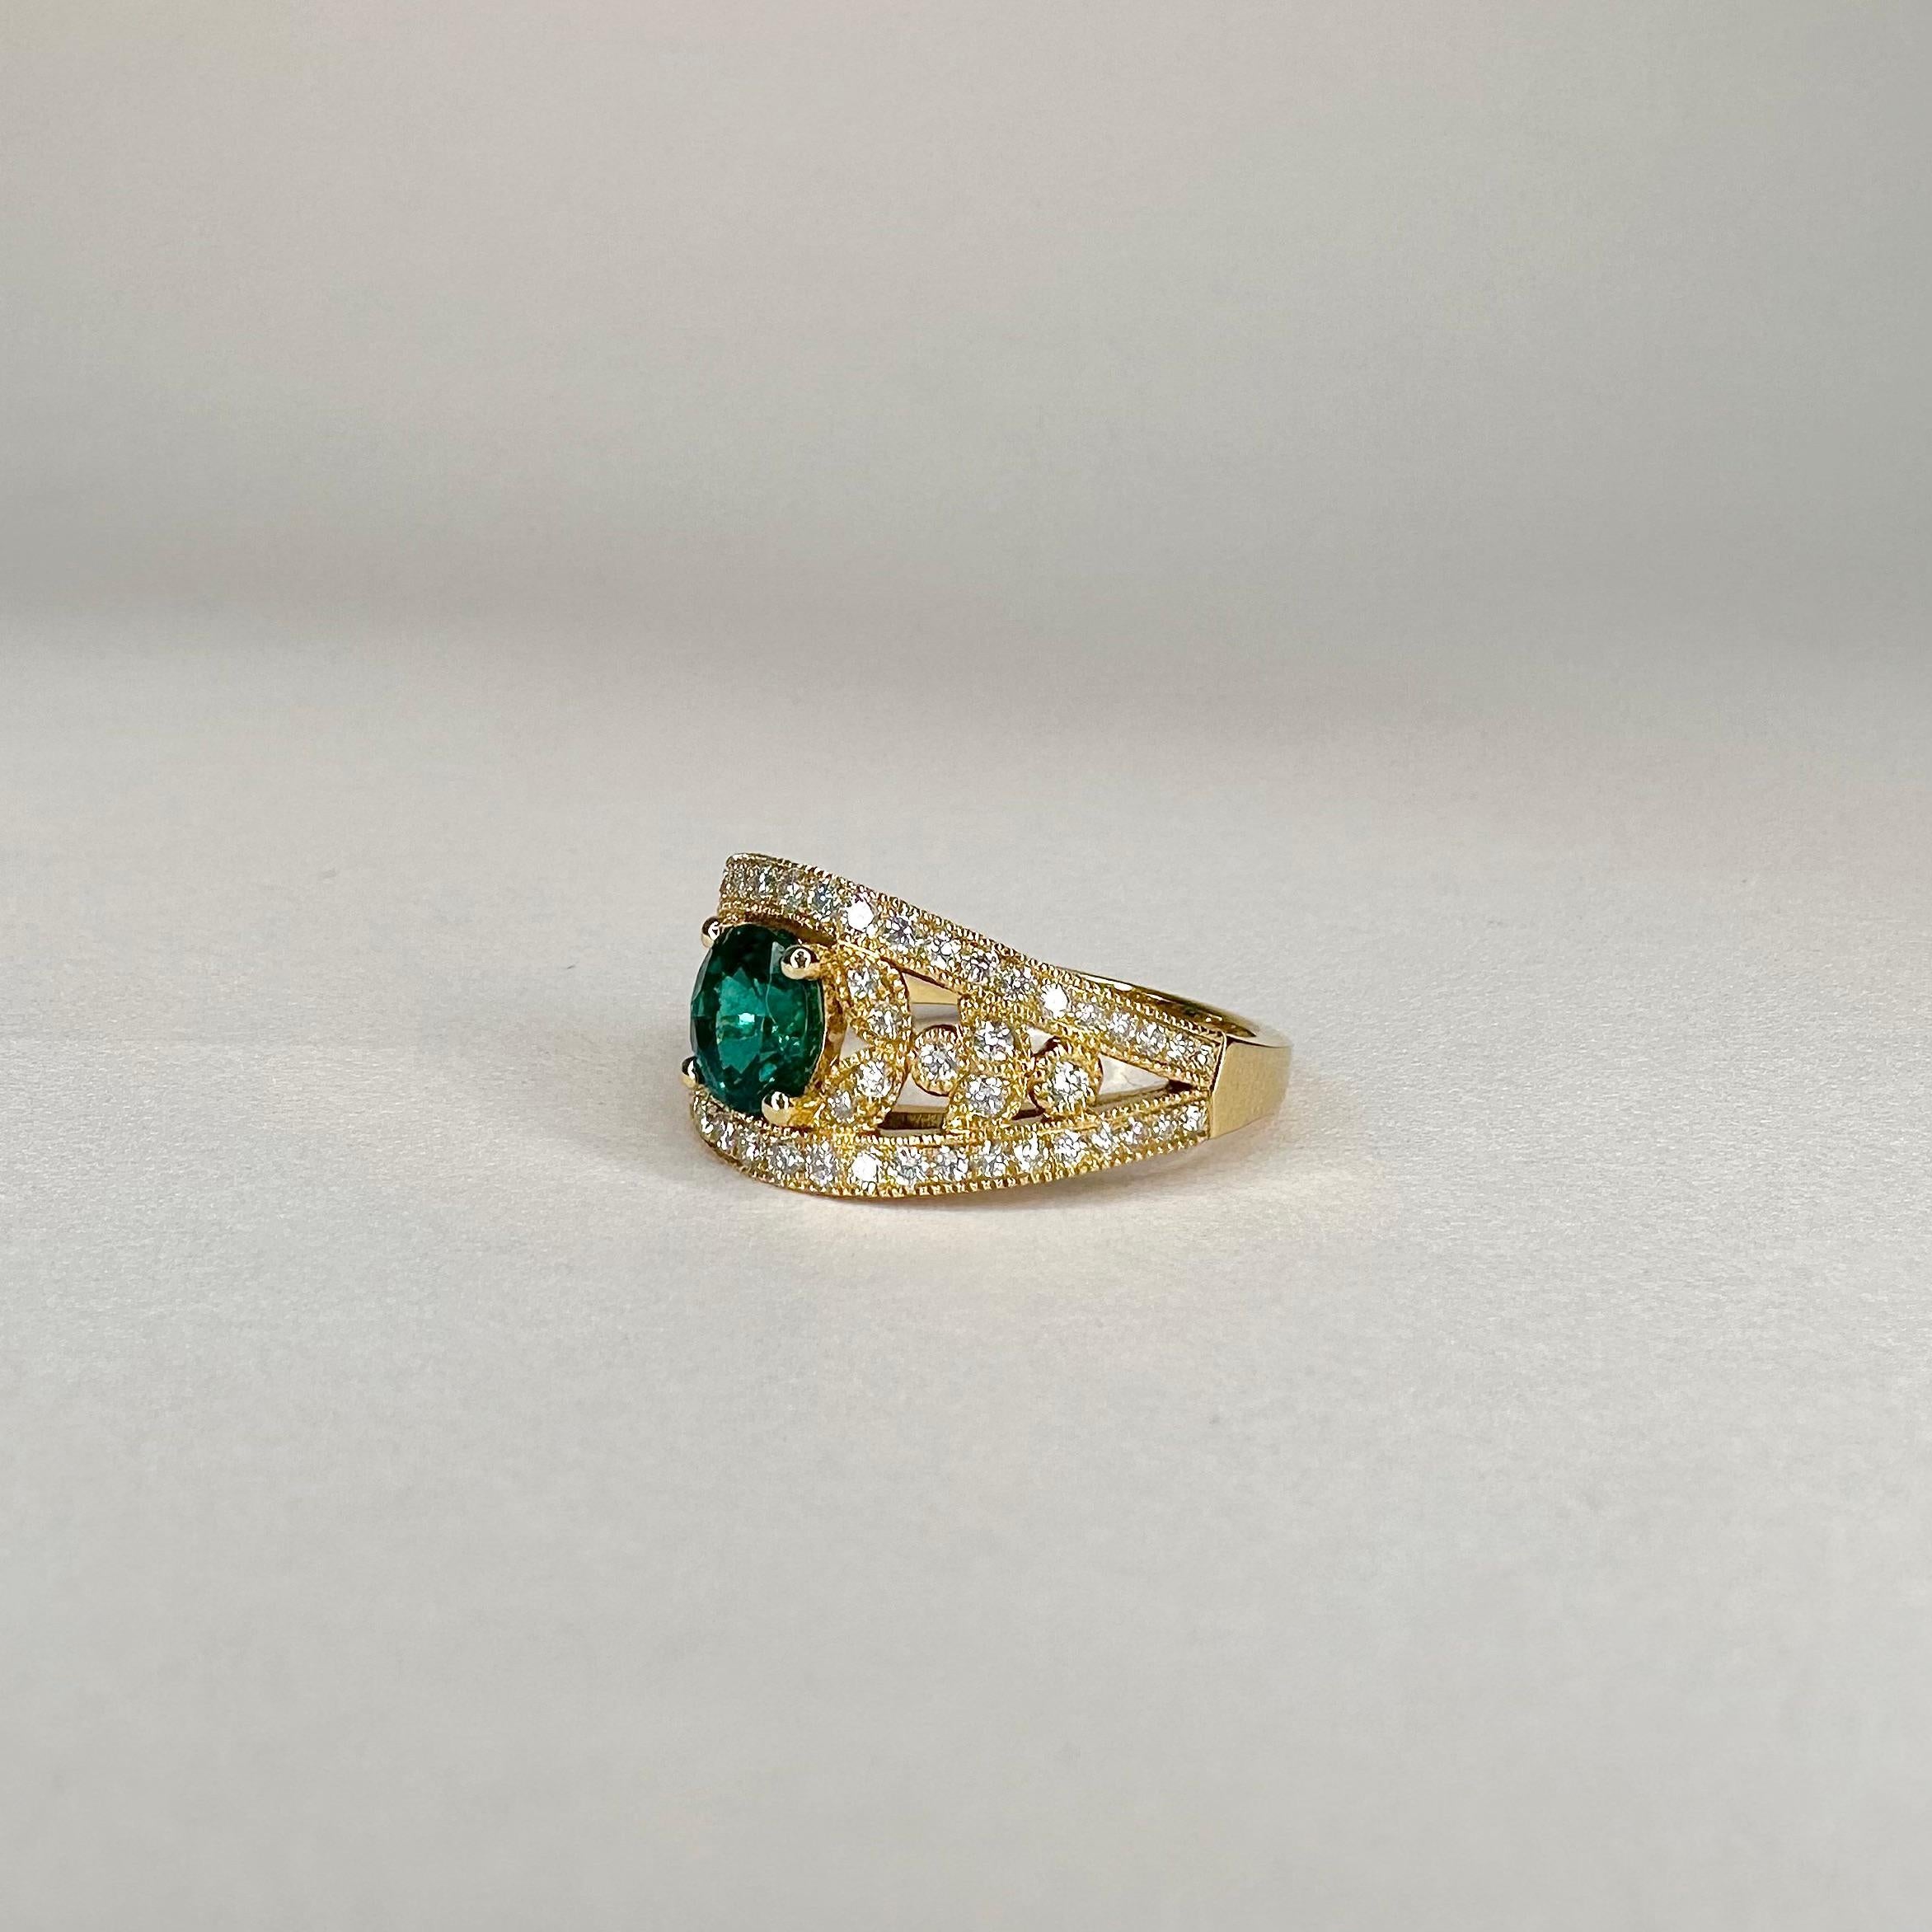 For Sale:  18k Yellow Gold Laurel Leaf Design 0.85 Ct Vivid Green Emerald Ring with Diamond 5